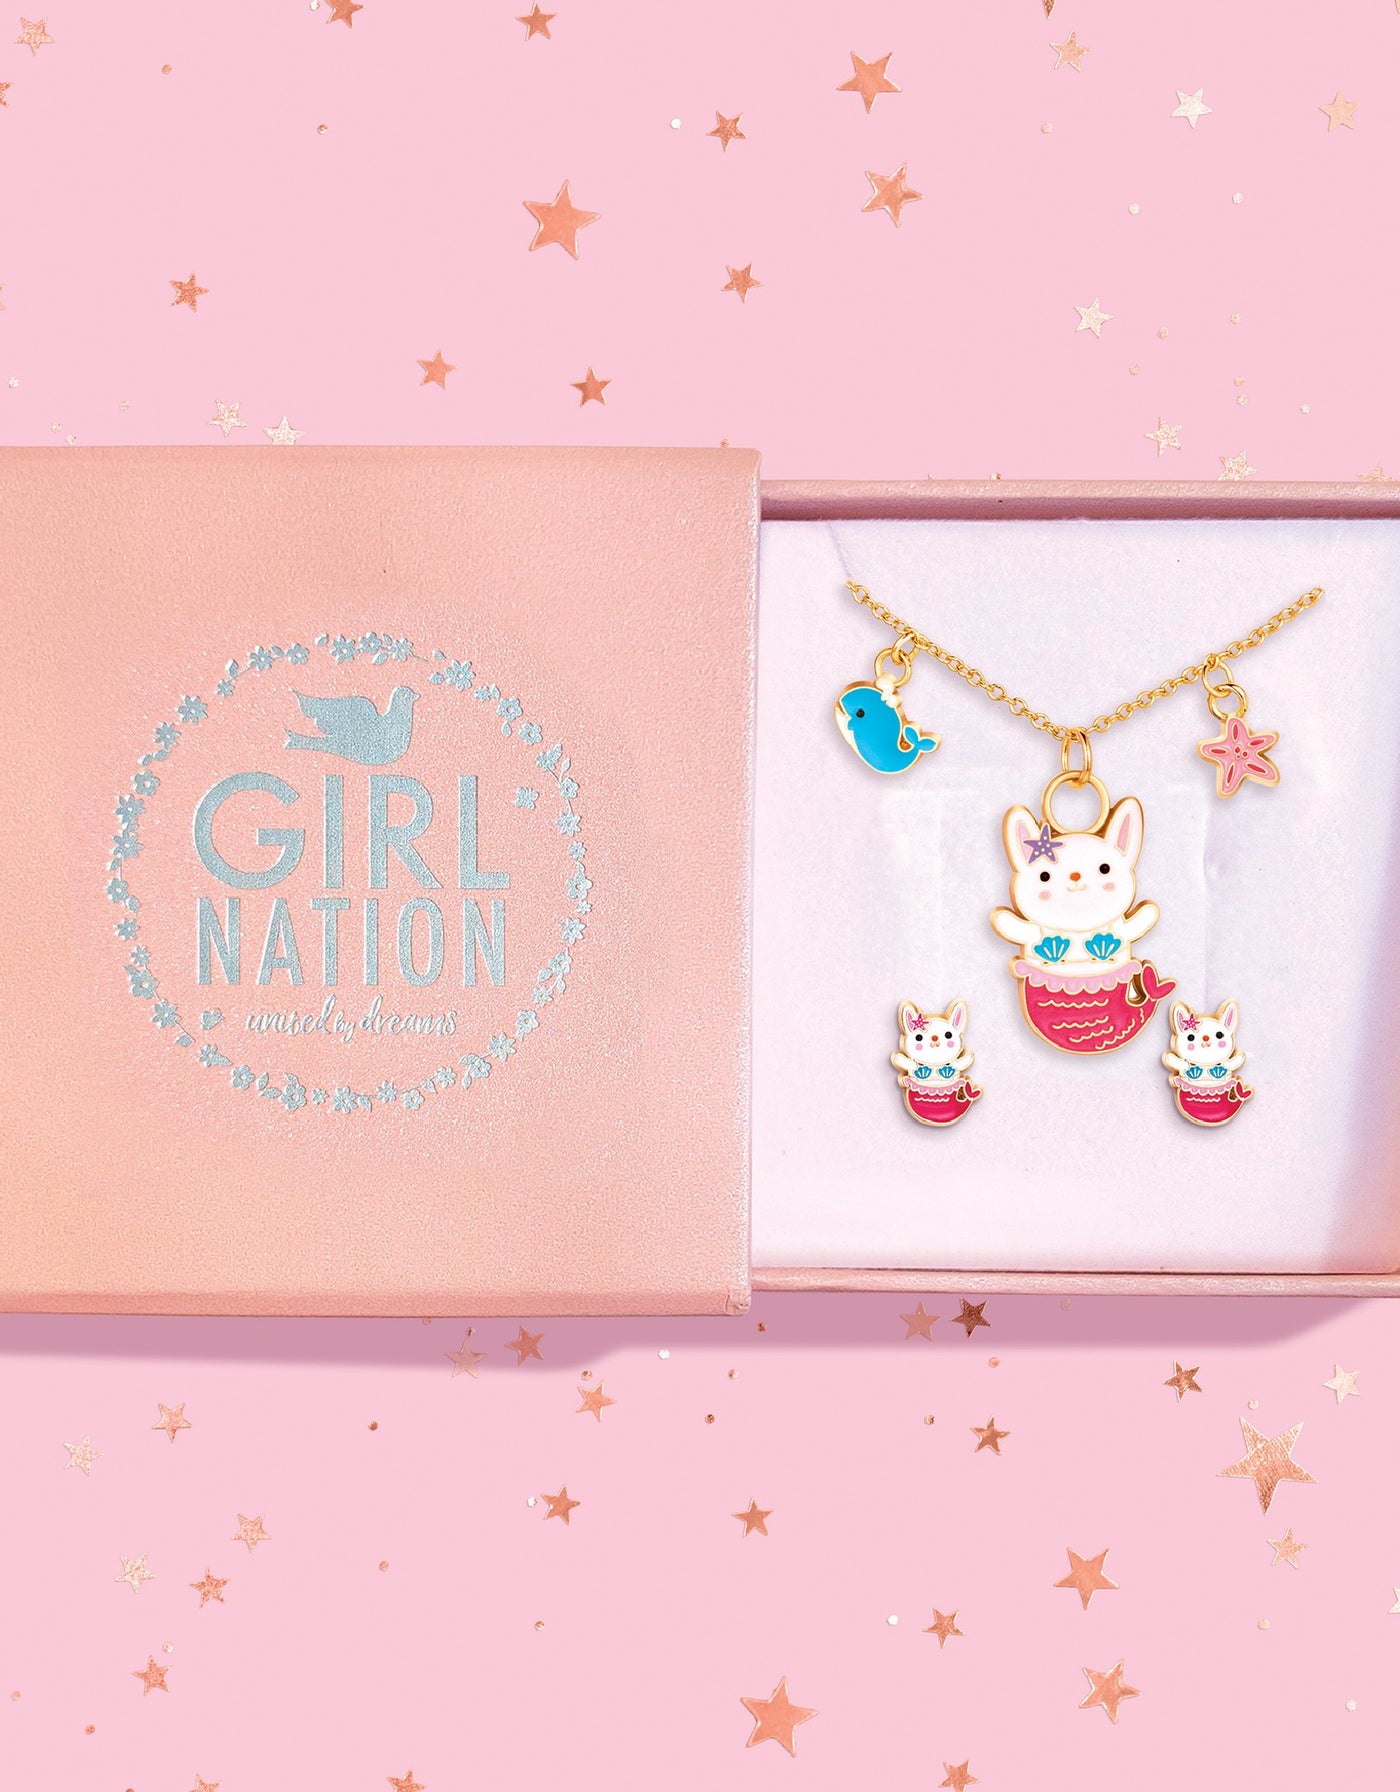 Fantasy necklace and earrings gift set - Pink mermaid bunny - Girl Nation